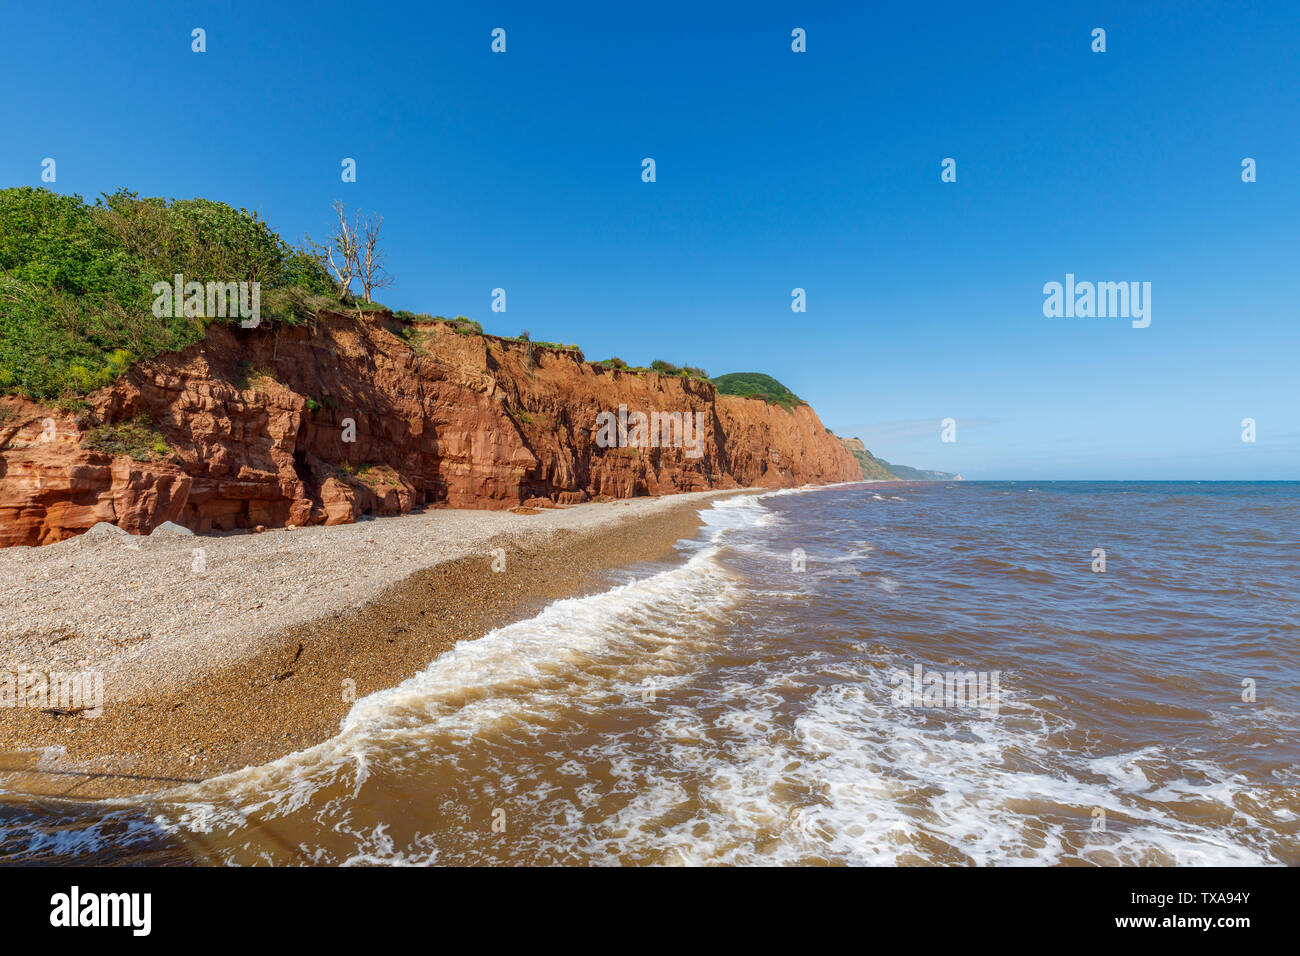 View of Salcombe Hill and cliffs looking east from Sidmouth, a small popular south coast seaside town in Devon, south-west England Stock Photo